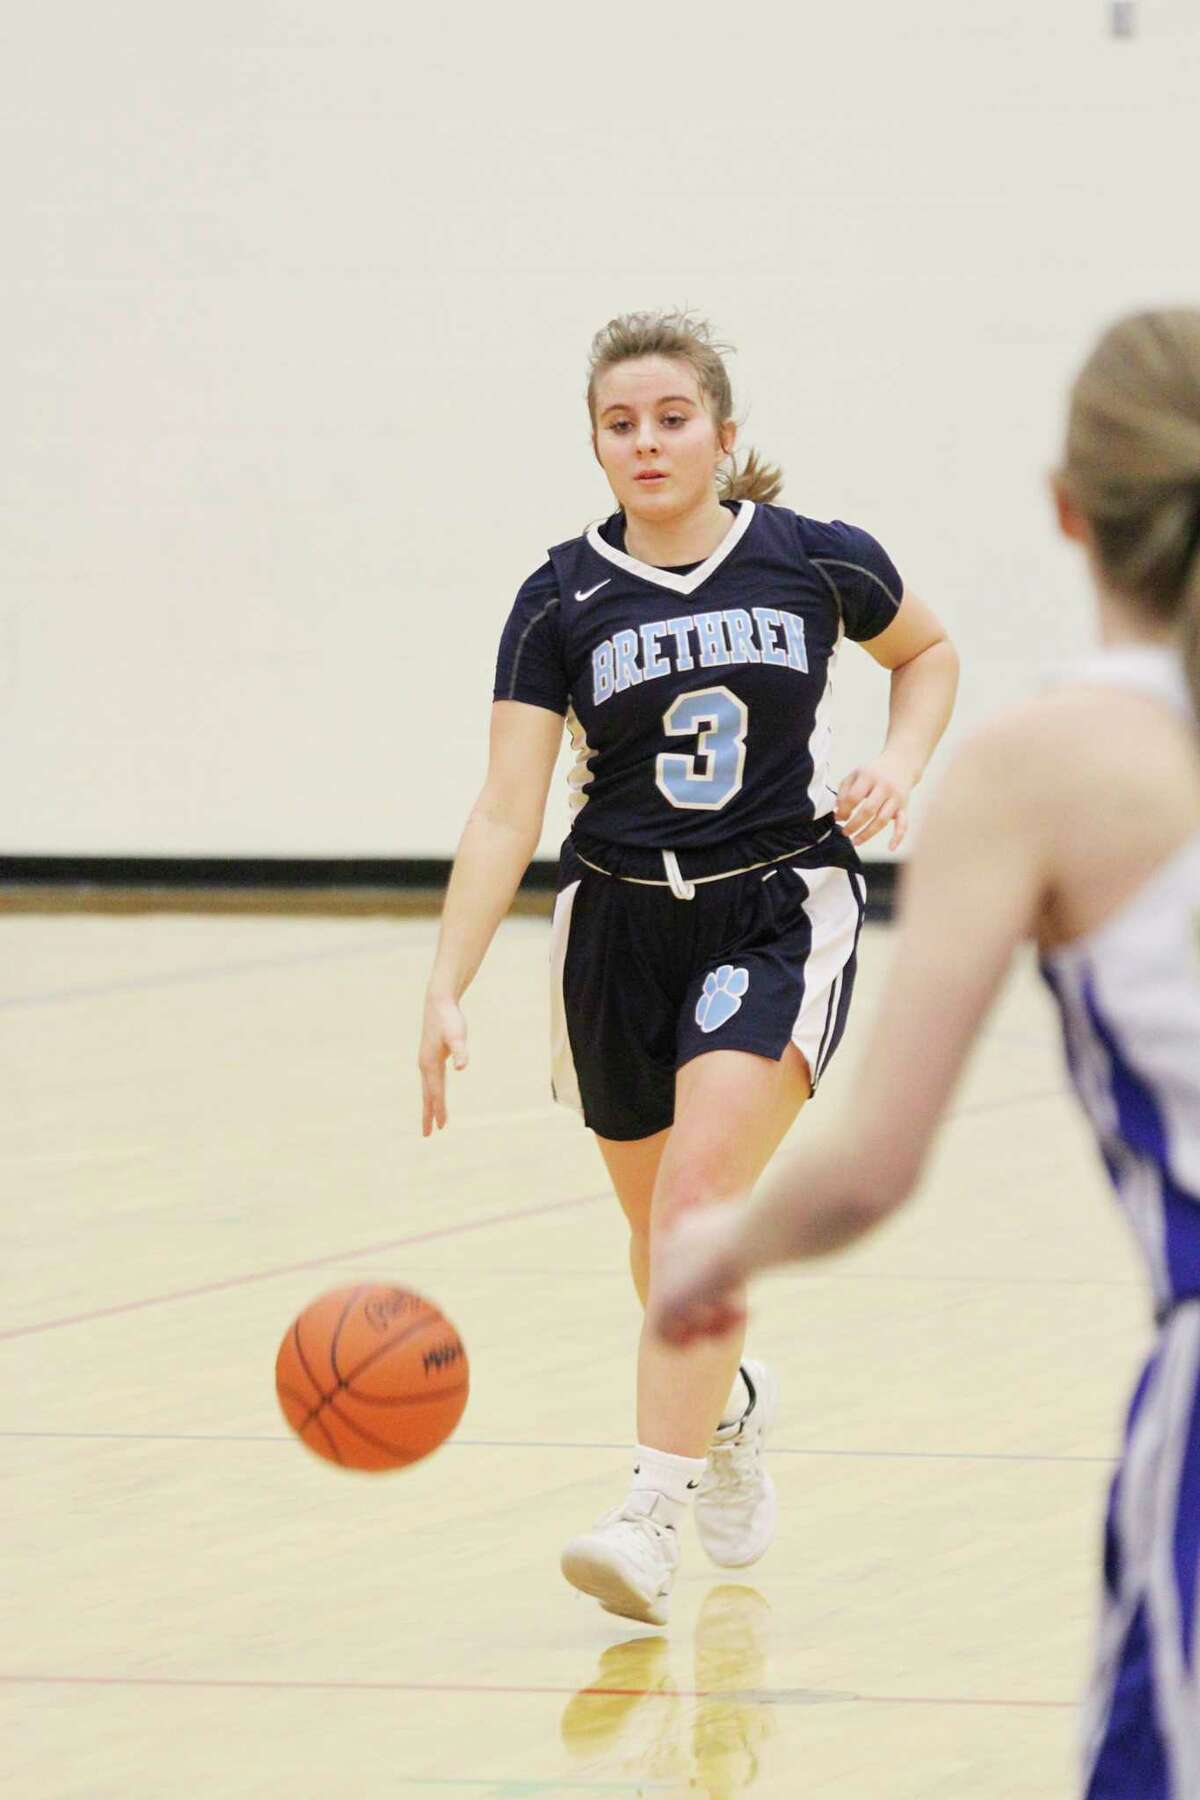 Brethren's Megan Cordes dribbles down the court during the Bobcats' district loss to Onekama. (Dylan Savela/News Advocate)